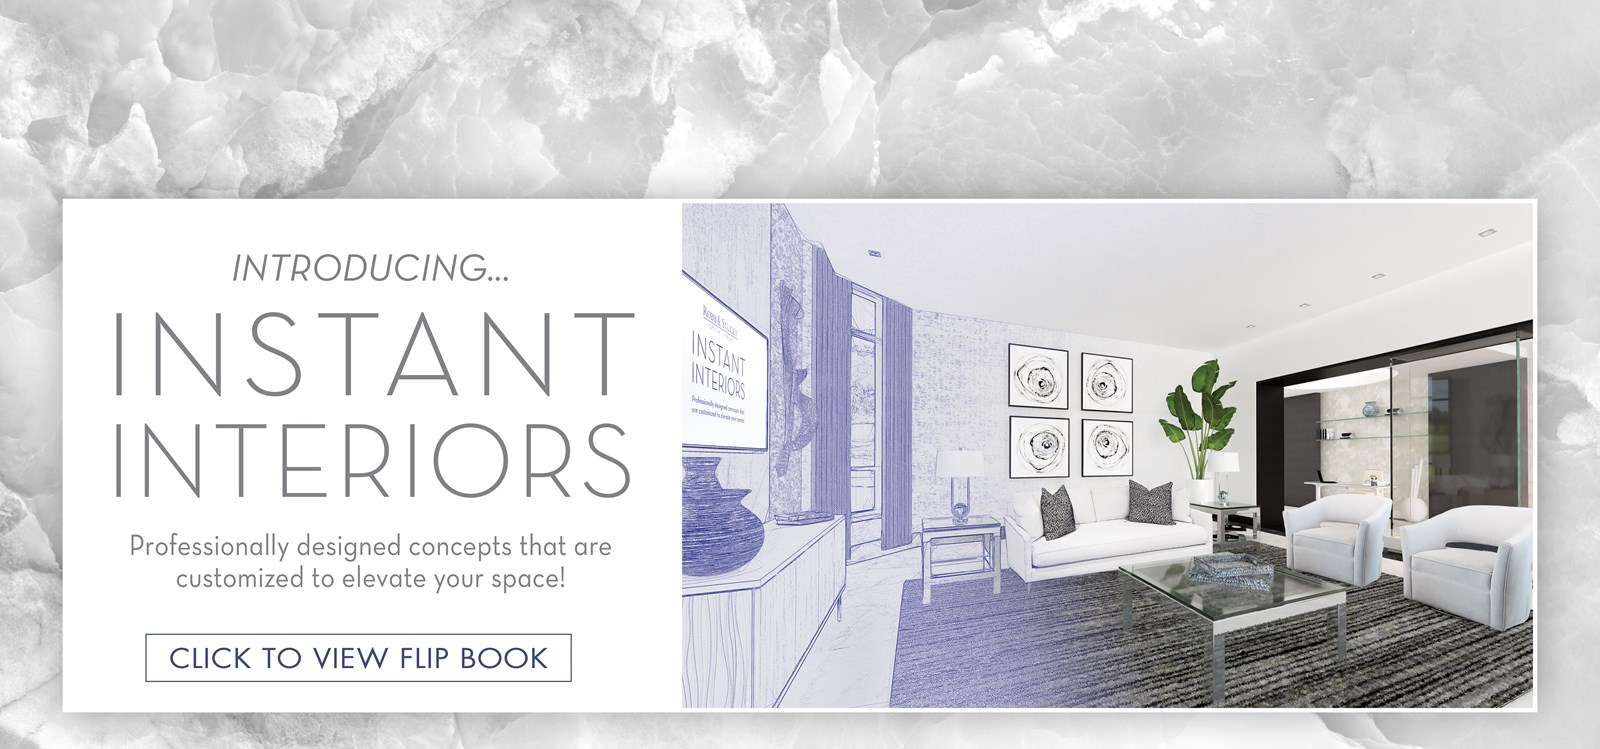 Image of Instant Interiors Contemporary Collection. Text: Introducing... Instant Interiors. Professionally designed concepts that are customized to elevate your space! Click to view Flip Book. Links to Instant Interiors Flip Book.